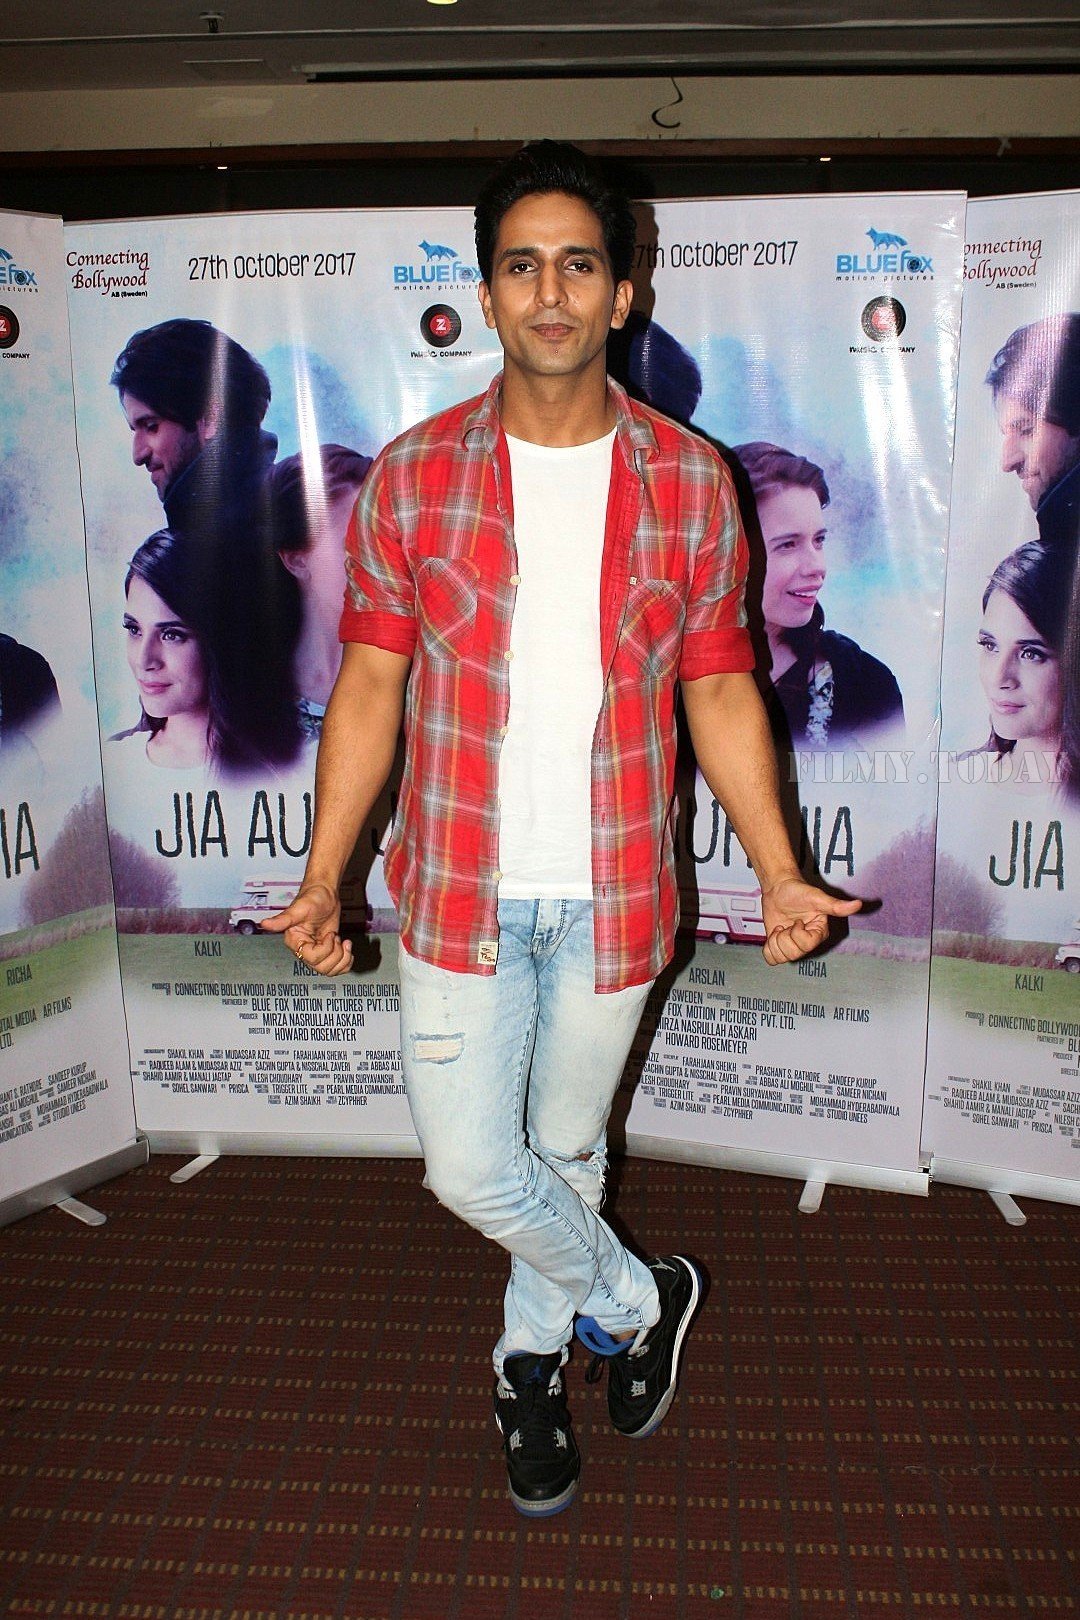 Arslan Goni - In Pics: Promotion Of Film Jia Aur Jia | Picture 1535707